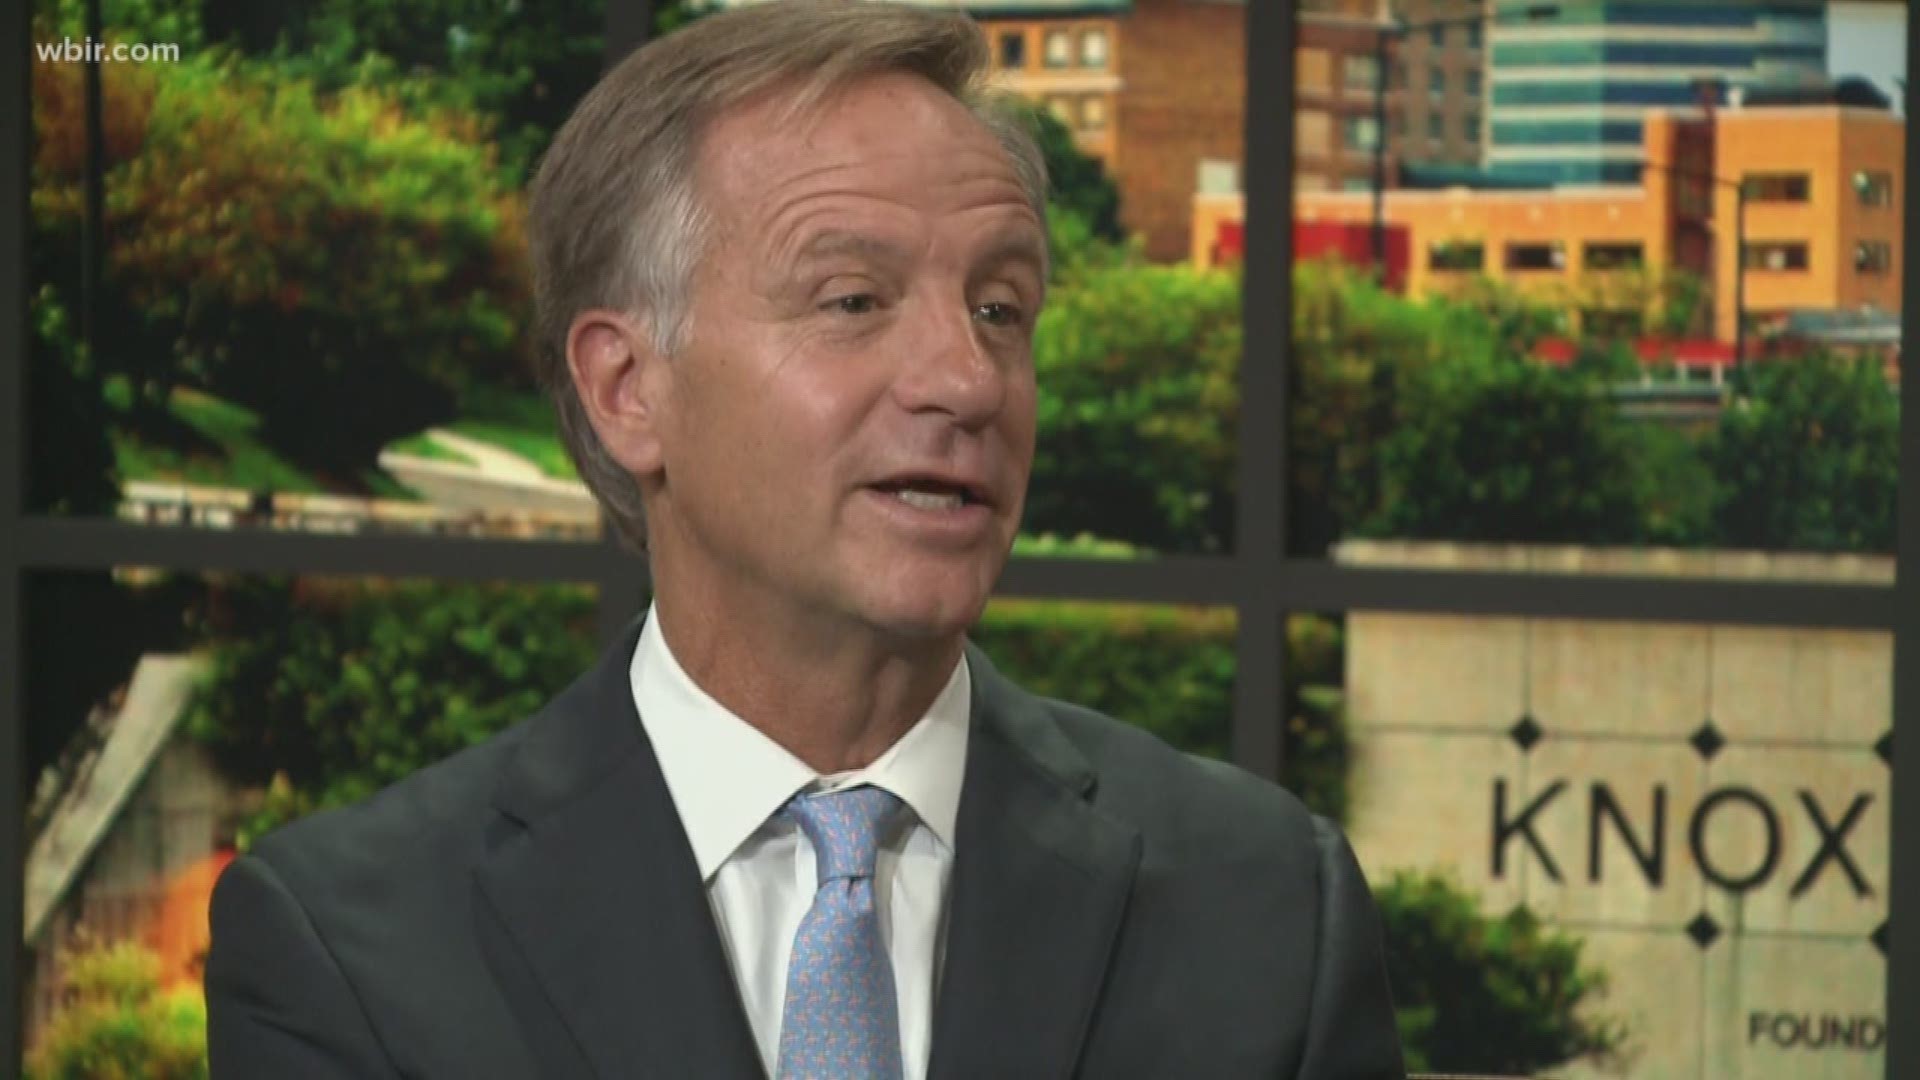 Former Tennessee Governor Bill Haslam shares his memories of watching the Apollo 11 Space mission that put man on the moon 50 years ago. July 16, 2019-4pm